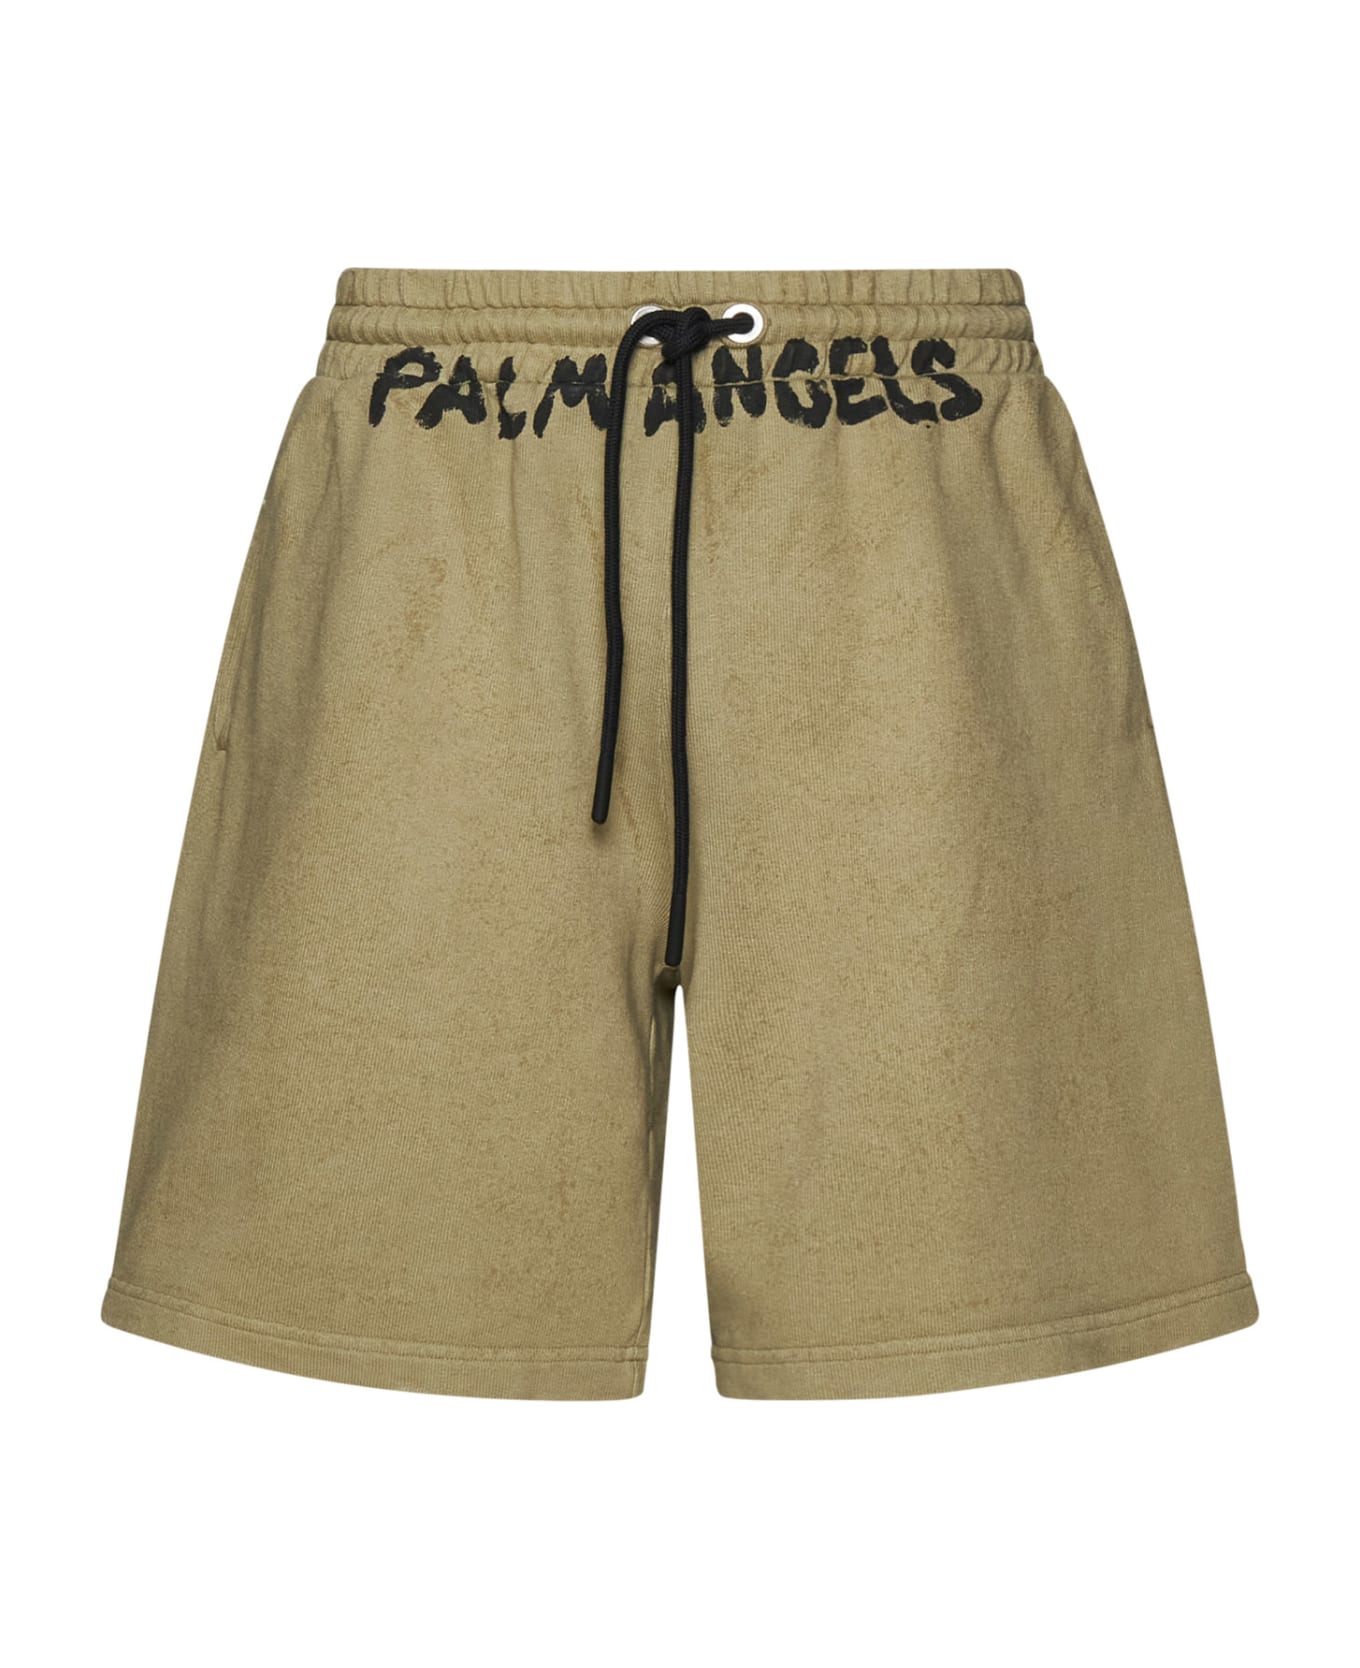 Palm Angels Shorts From - Military black